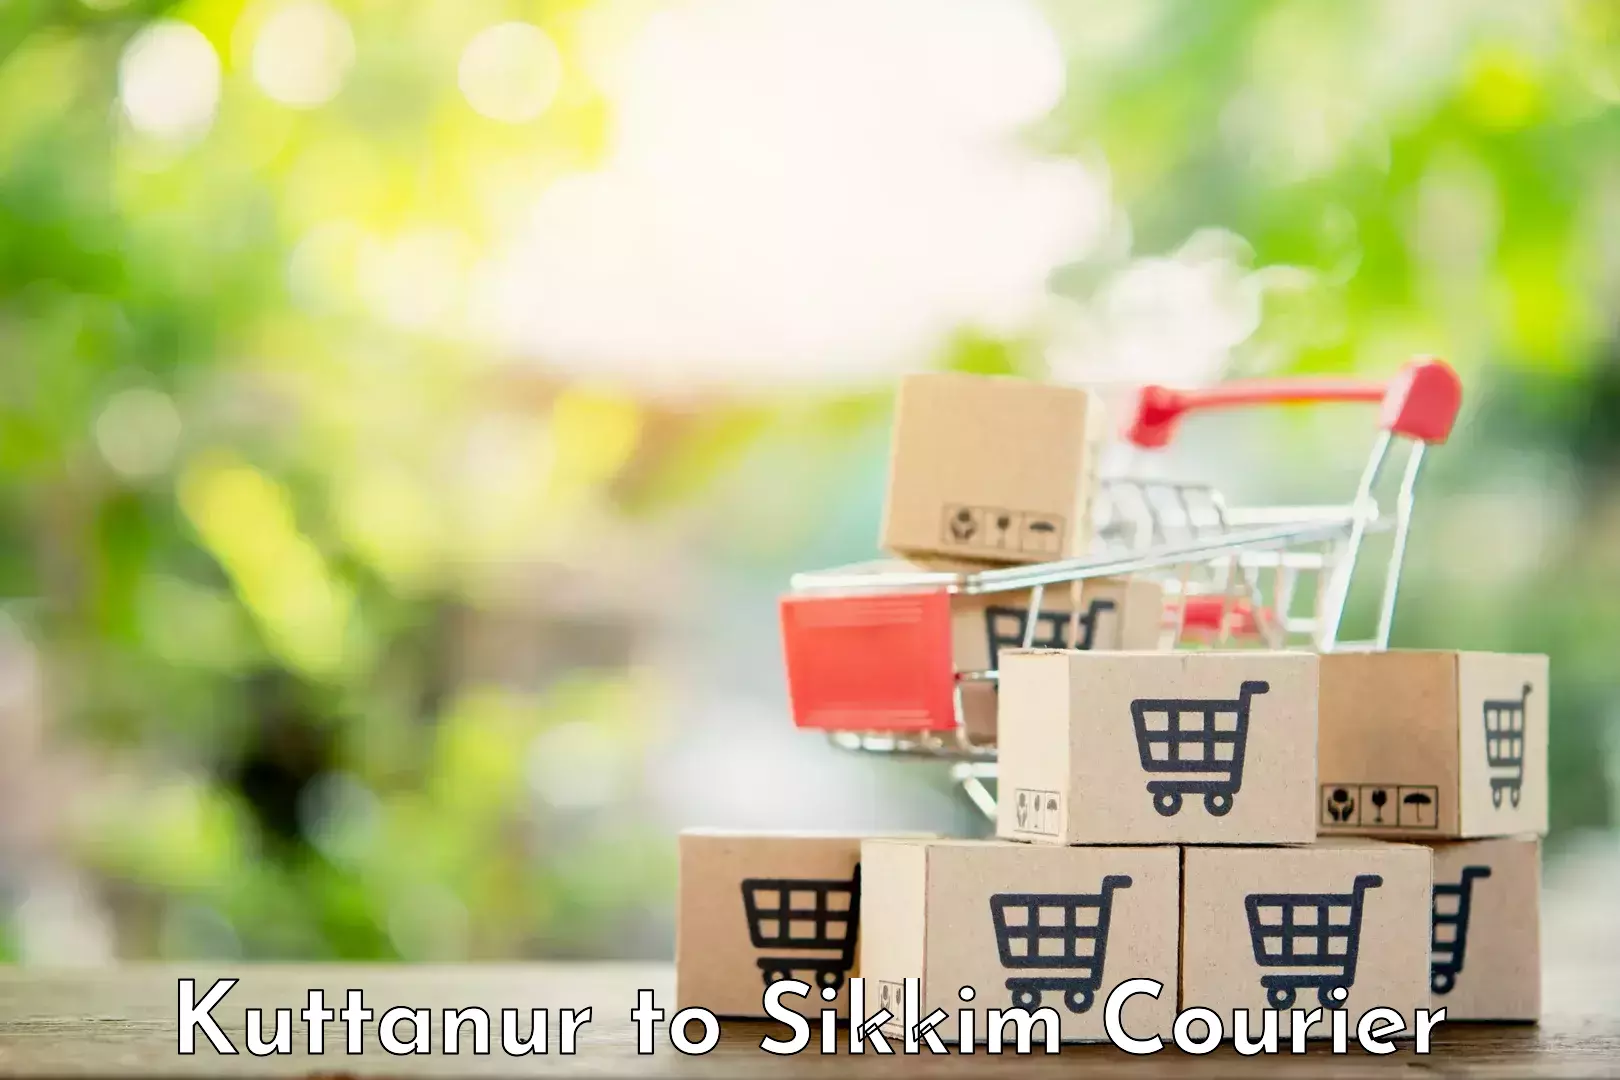 Full-service courier options Kuttanur to North Sikkim